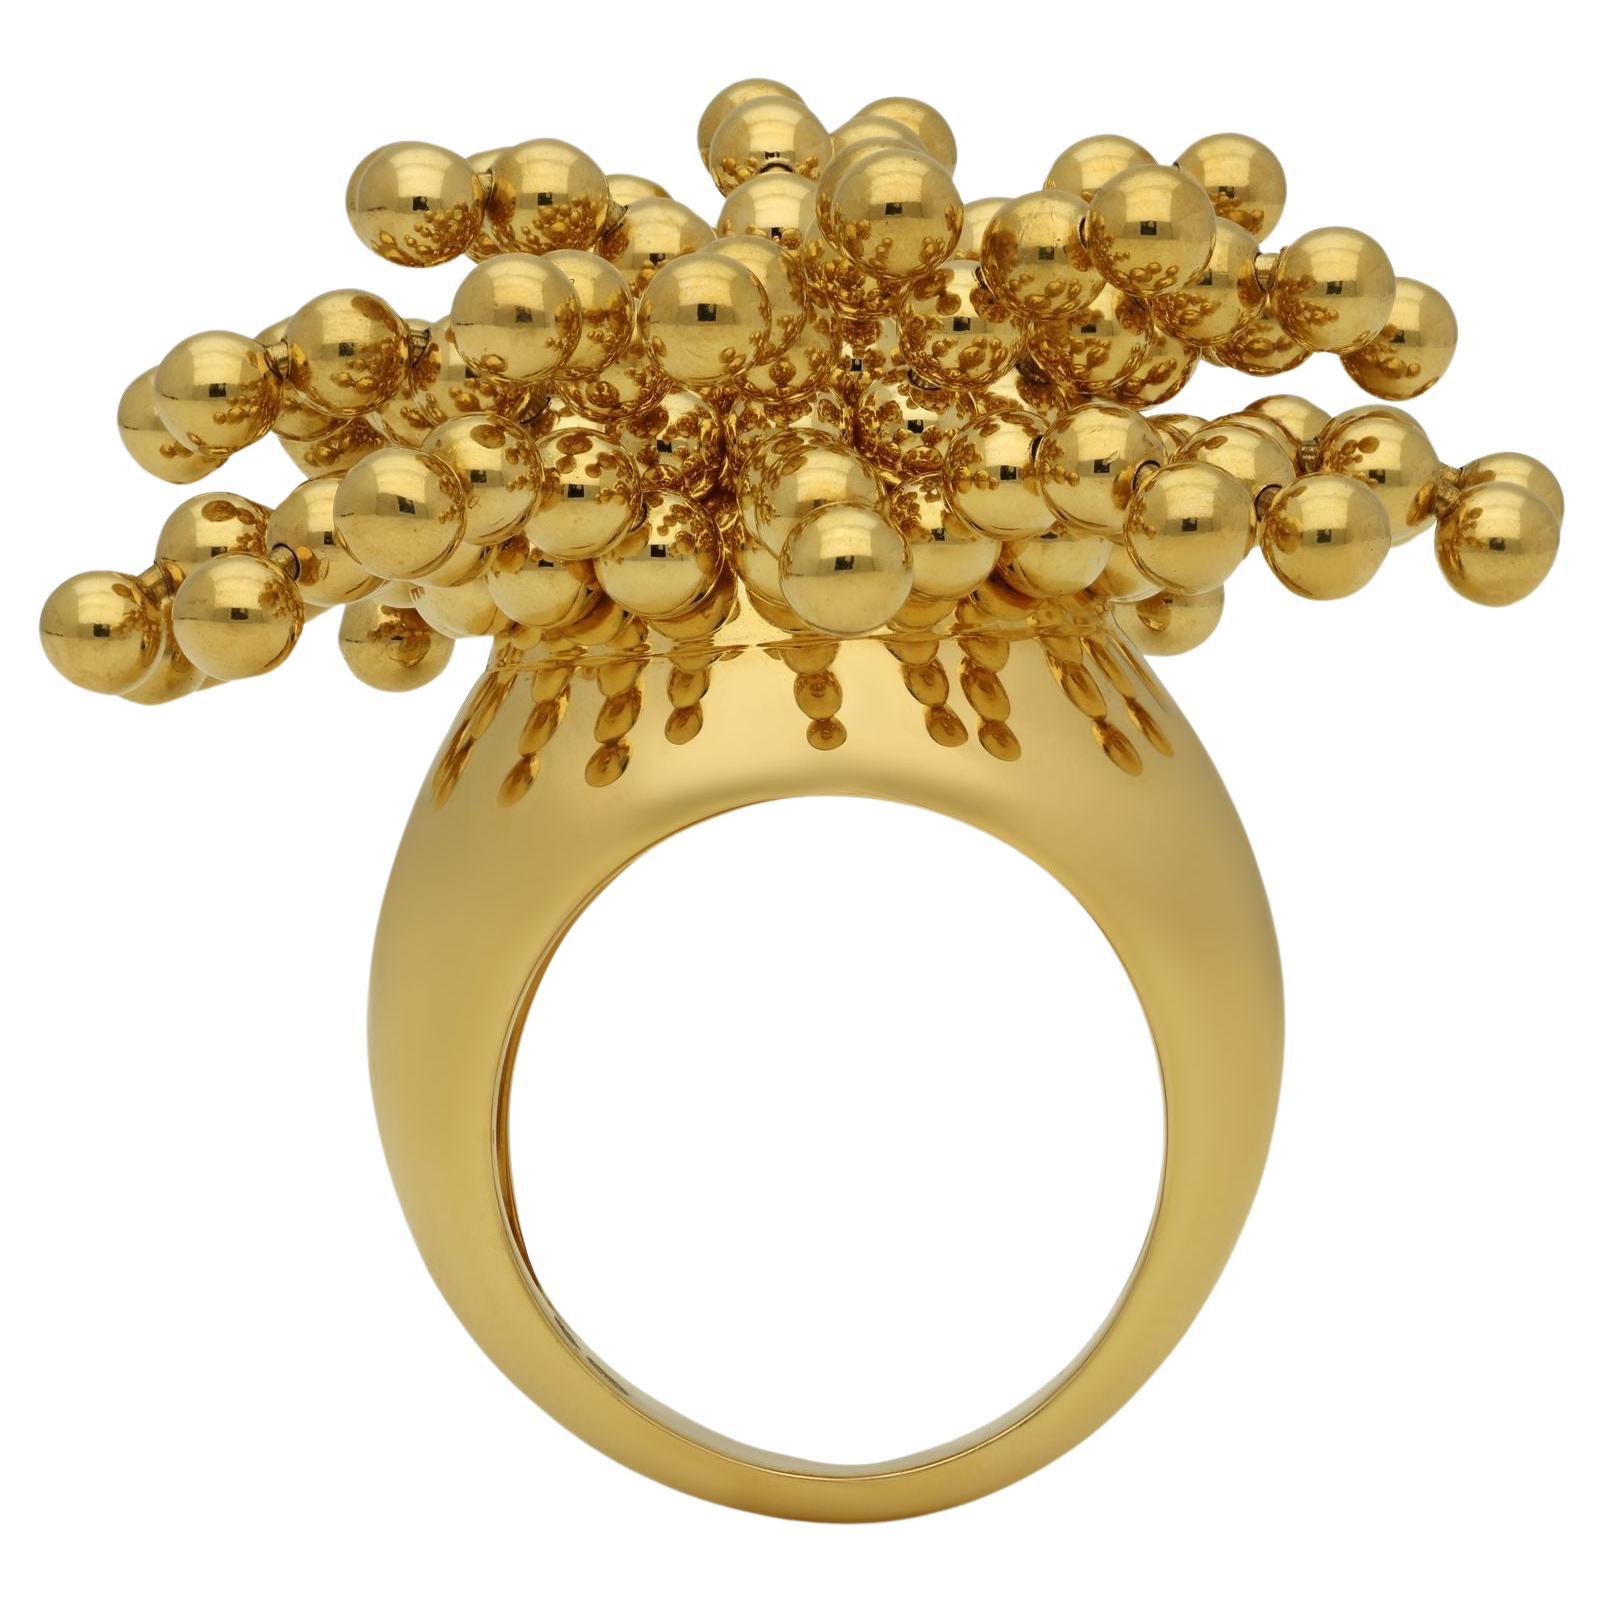 Cartier 18ct Gold 'Perruque' Ring From The Paris Nouvelle Vague Collection